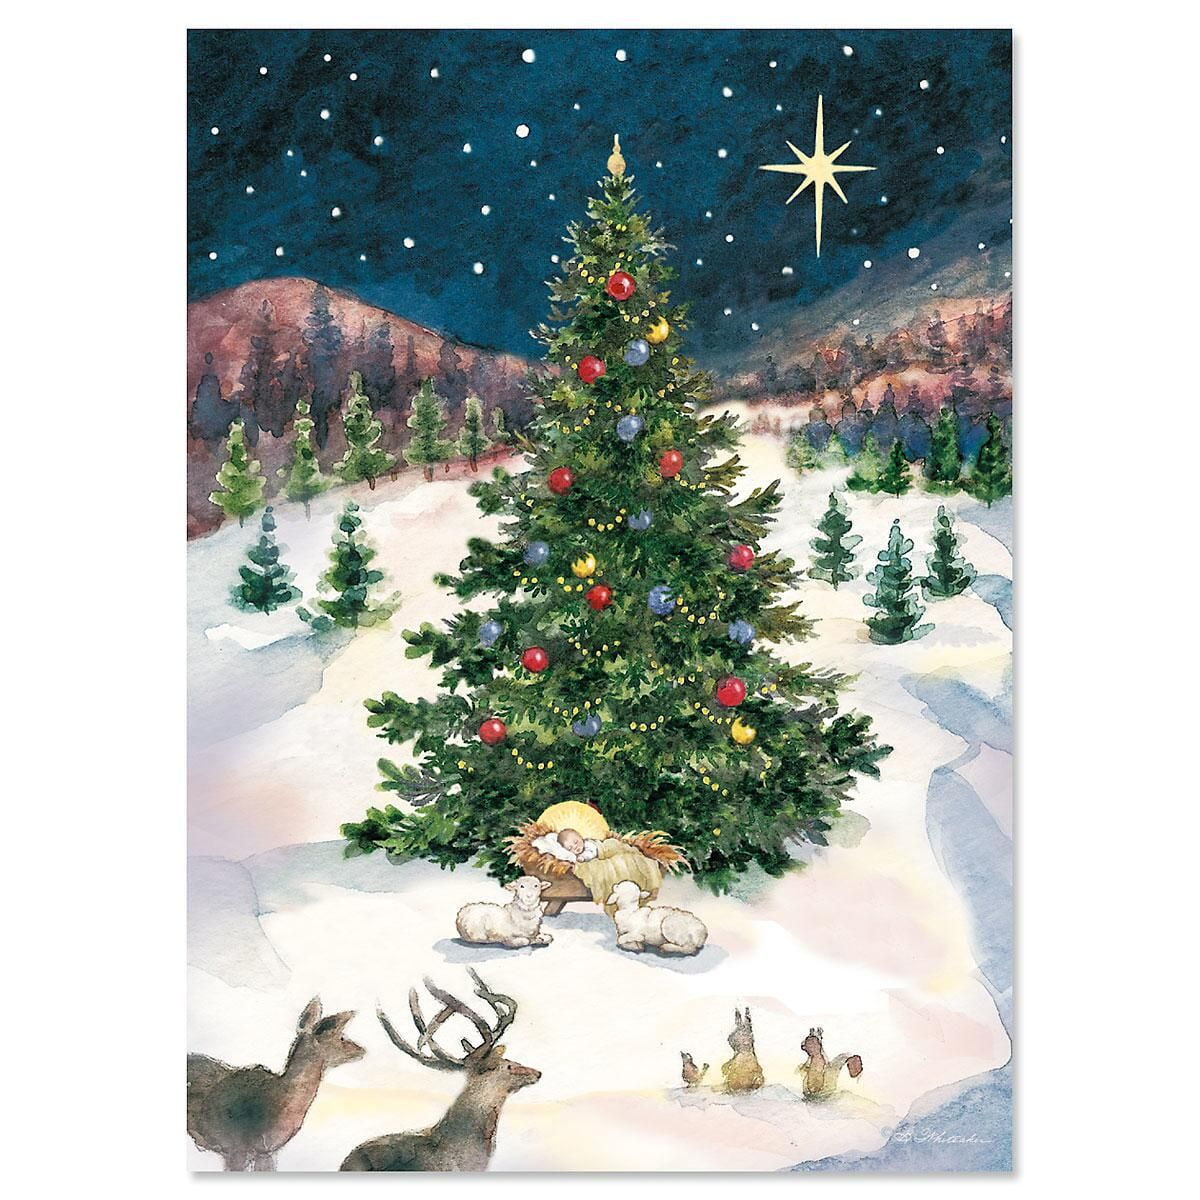 Singer Rocker Christmas Card With Reindeer Winter Sunny Landscape Switch Covers Wall Plate Graphics Wallplates